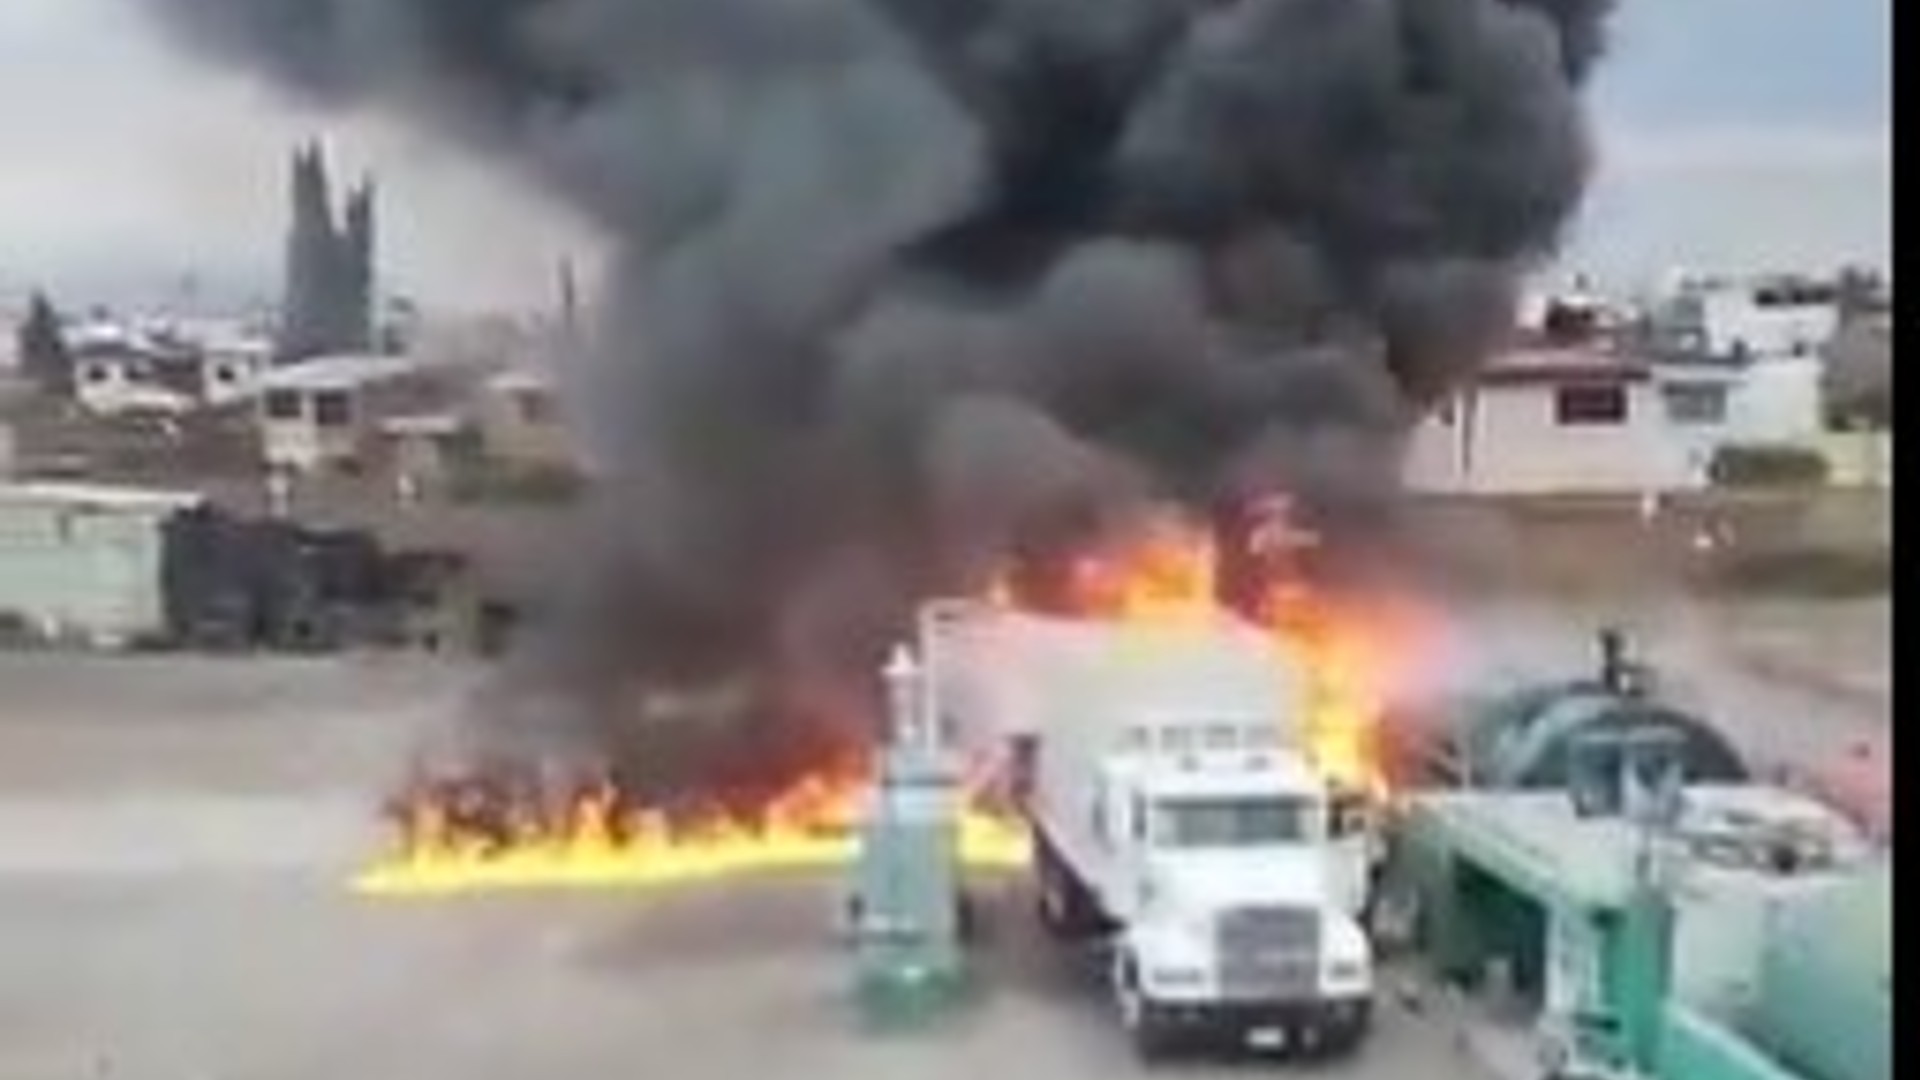 One person died after an explosion in San Pedro Cholula (Screenshot)